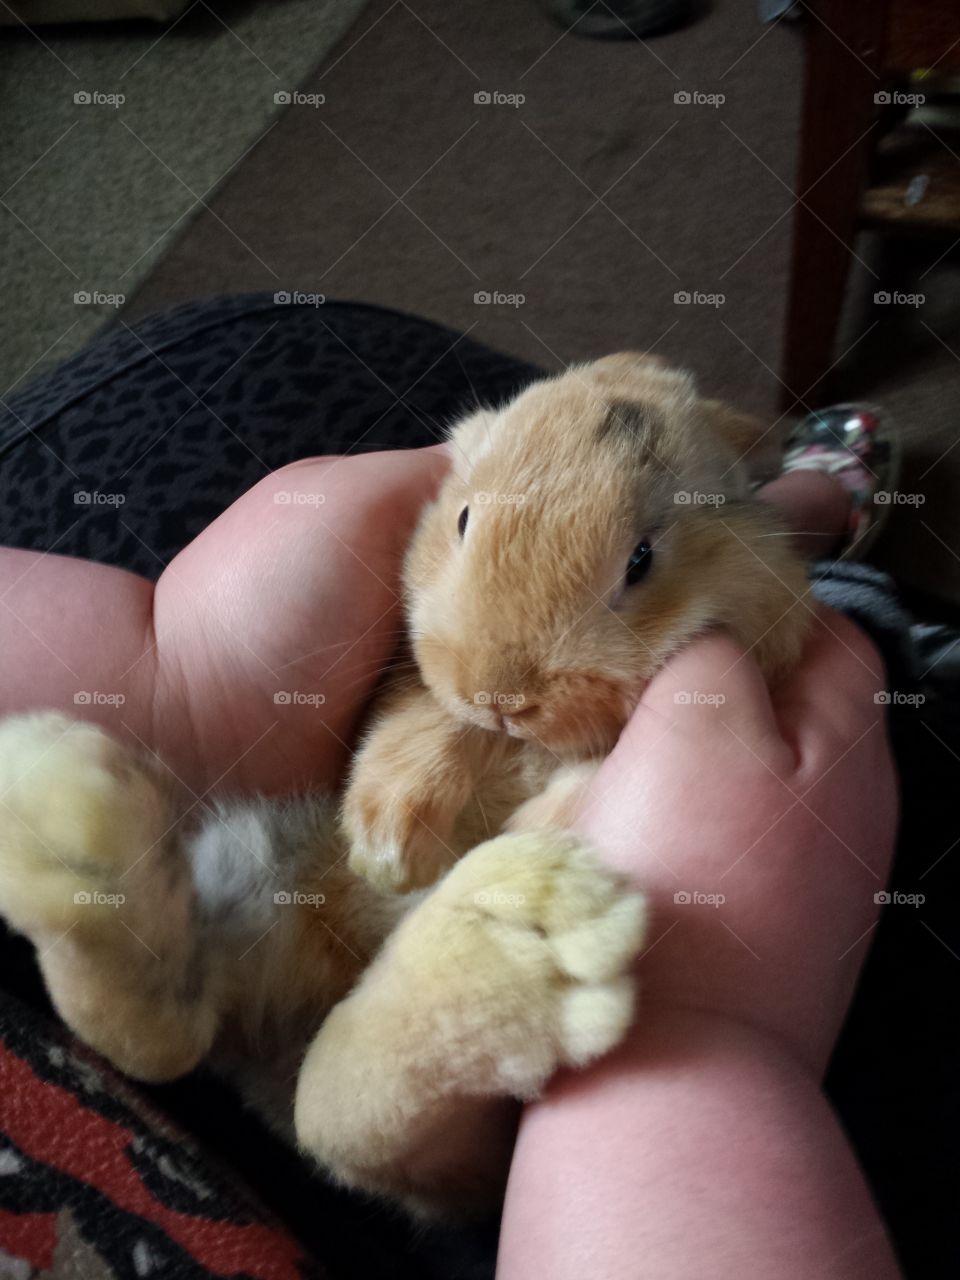 rabbit feet. Baby bunny loves attention and I had to catch the moment